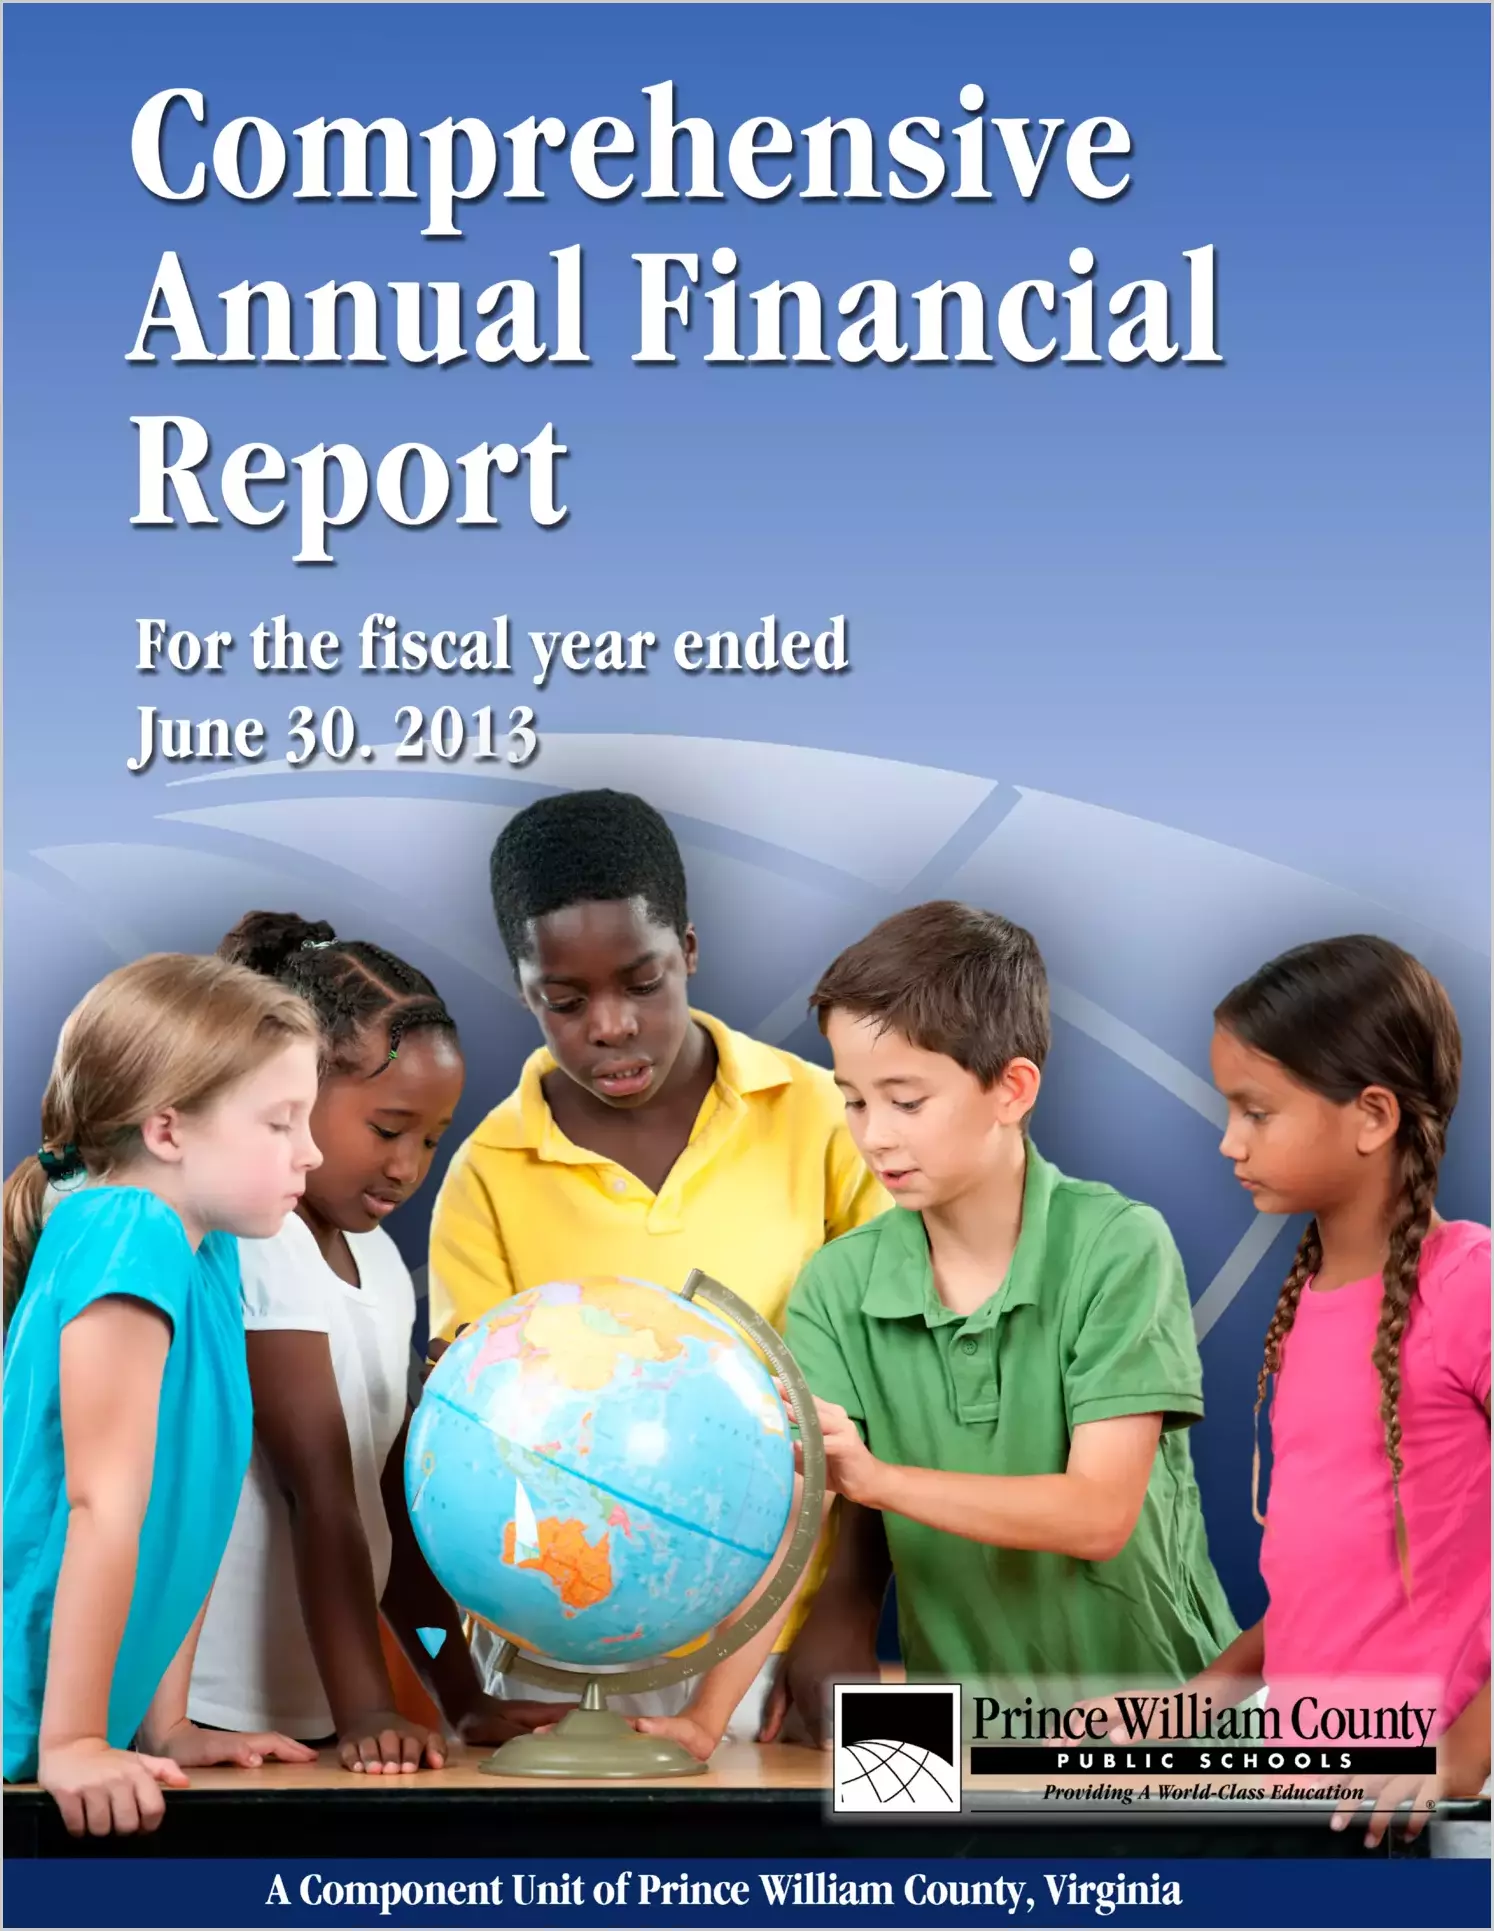 2013 Public Schools Annual Financial Report for County of Prince William